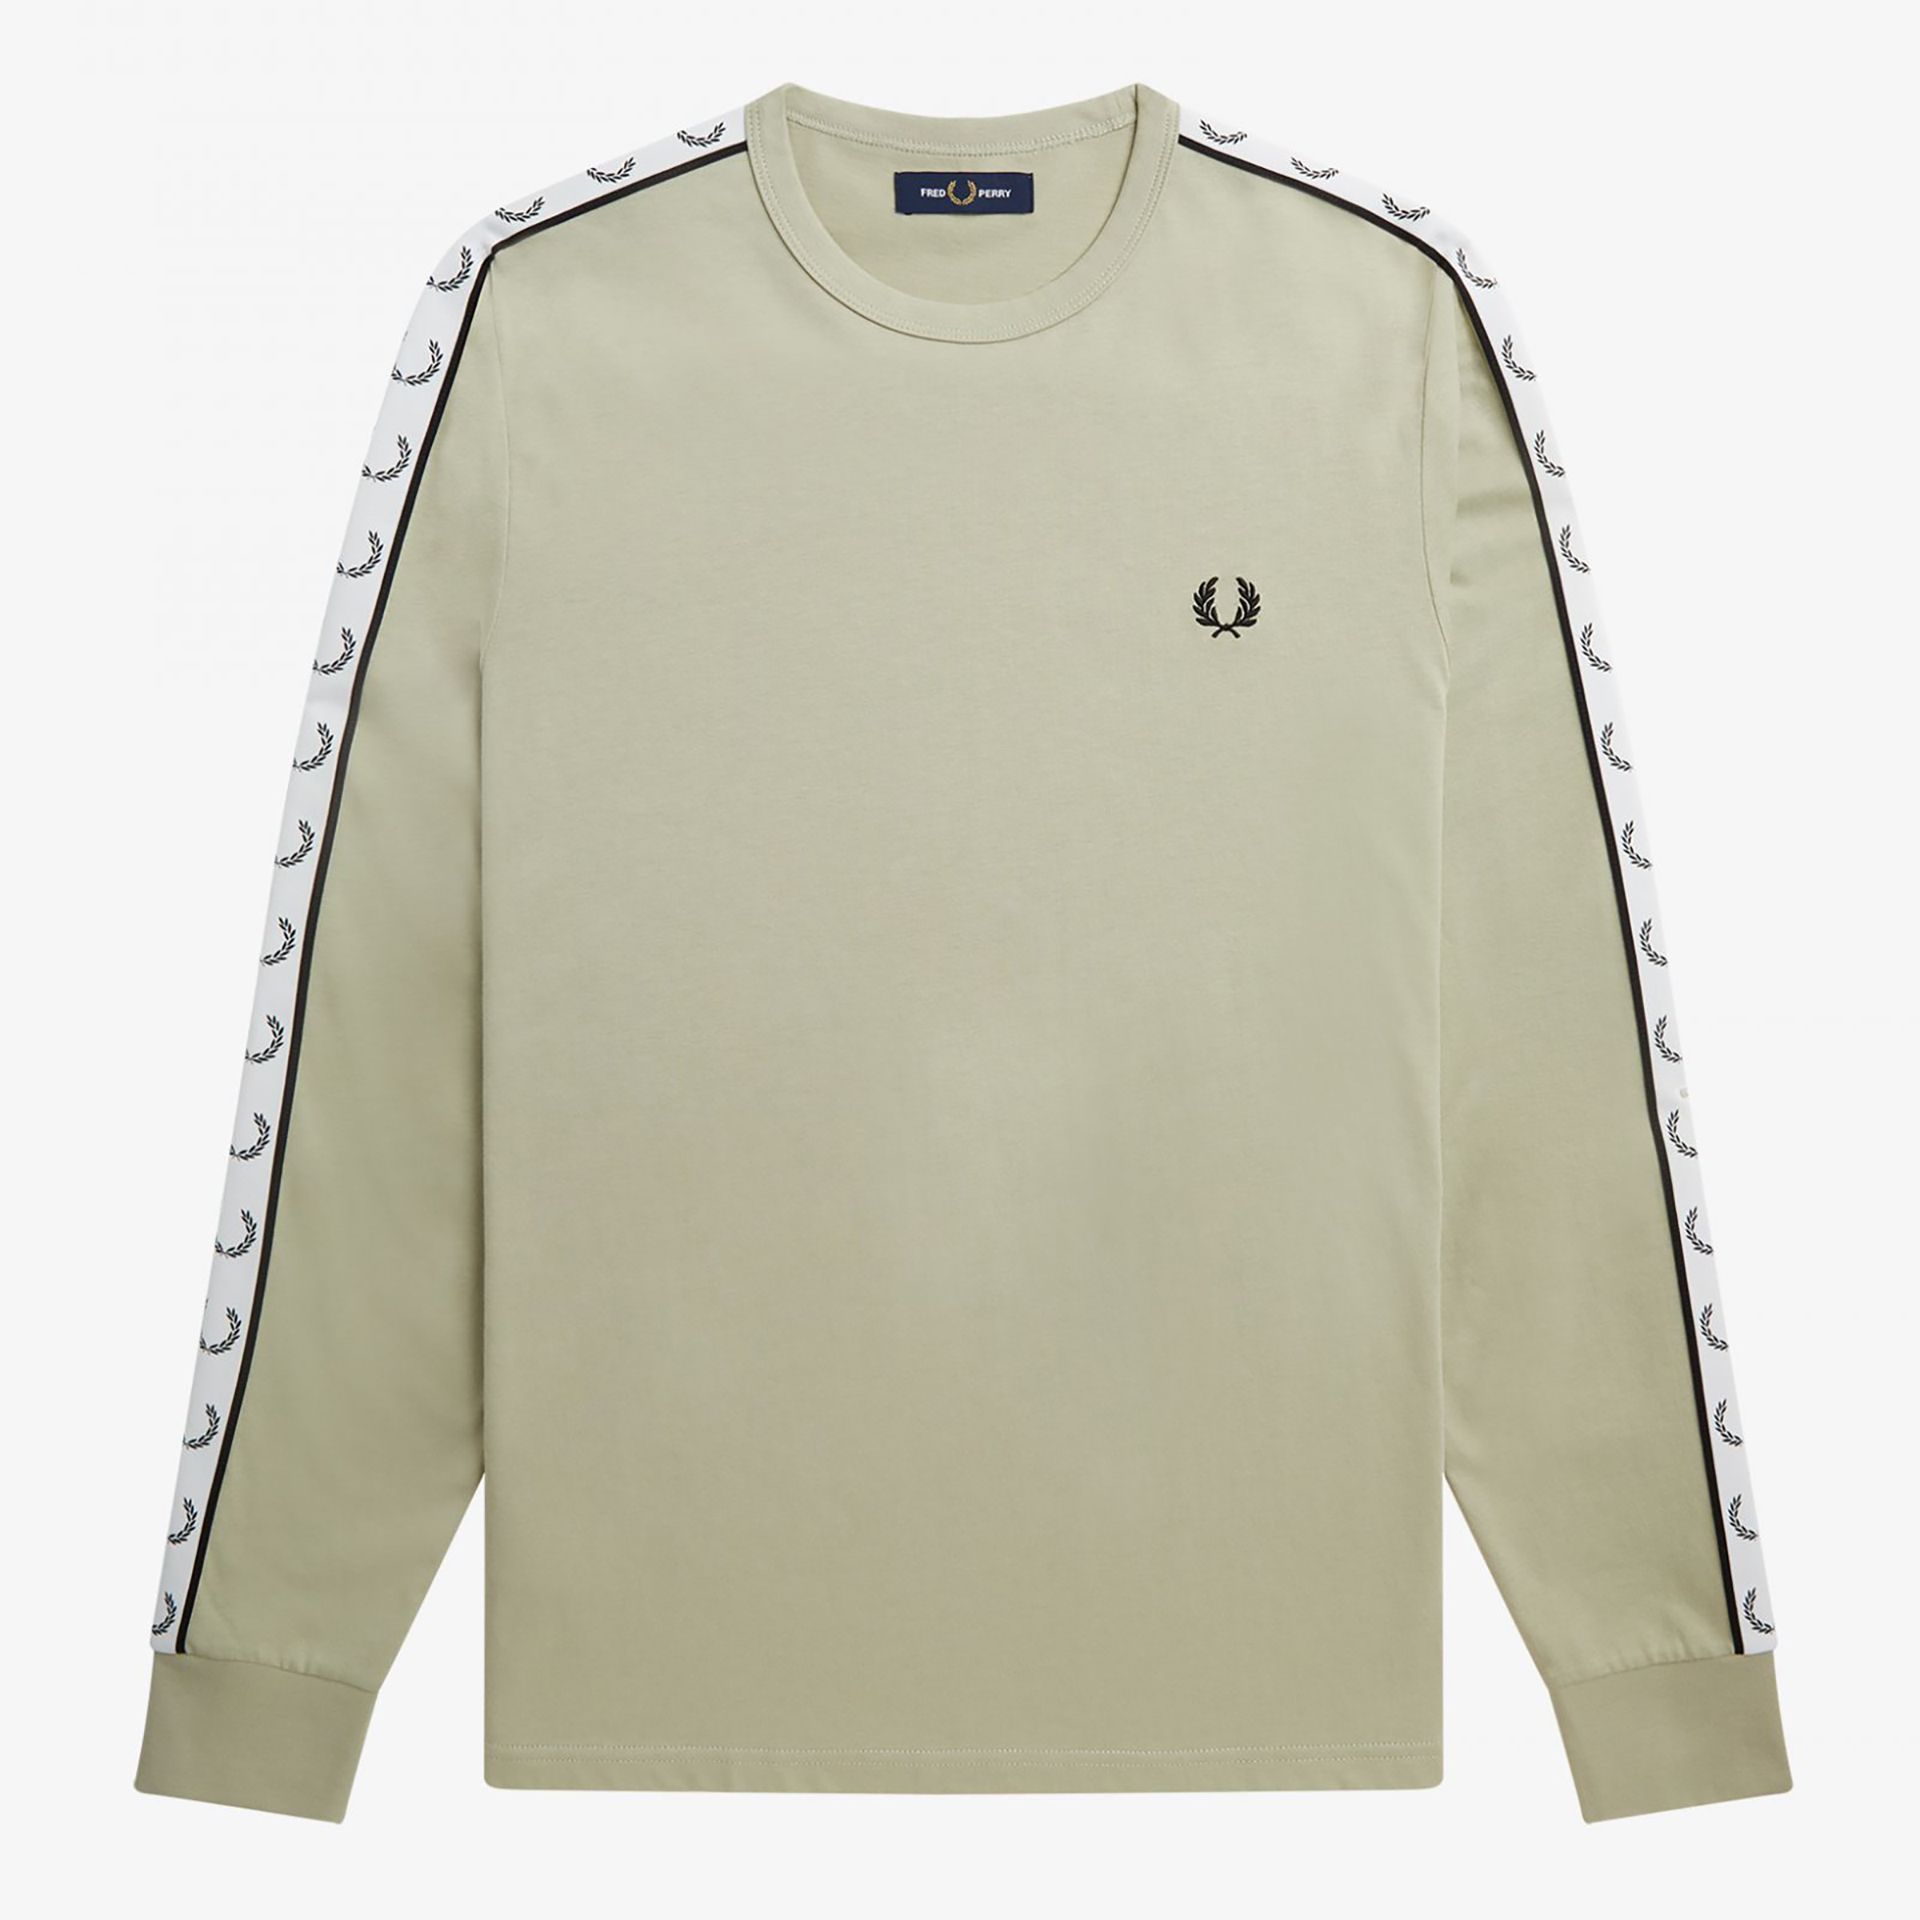 Fred Perry Taped Long Sleeve Light Oyster